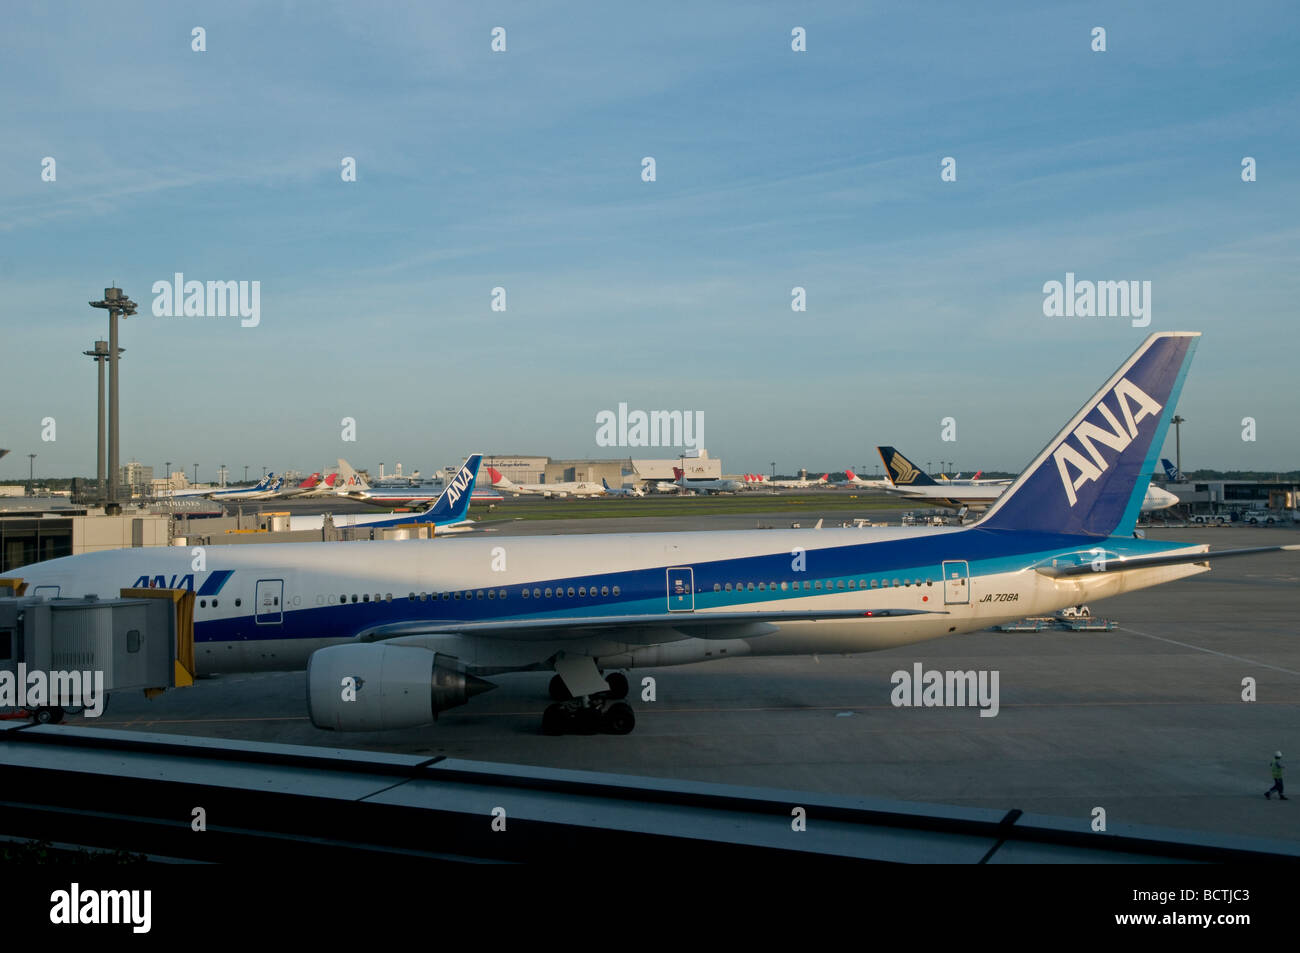 An airplane of All Nippon Airways also known as Zennikku or Ana stands on the tarmac at the Narita airport Tokyo Japan Stock Photo